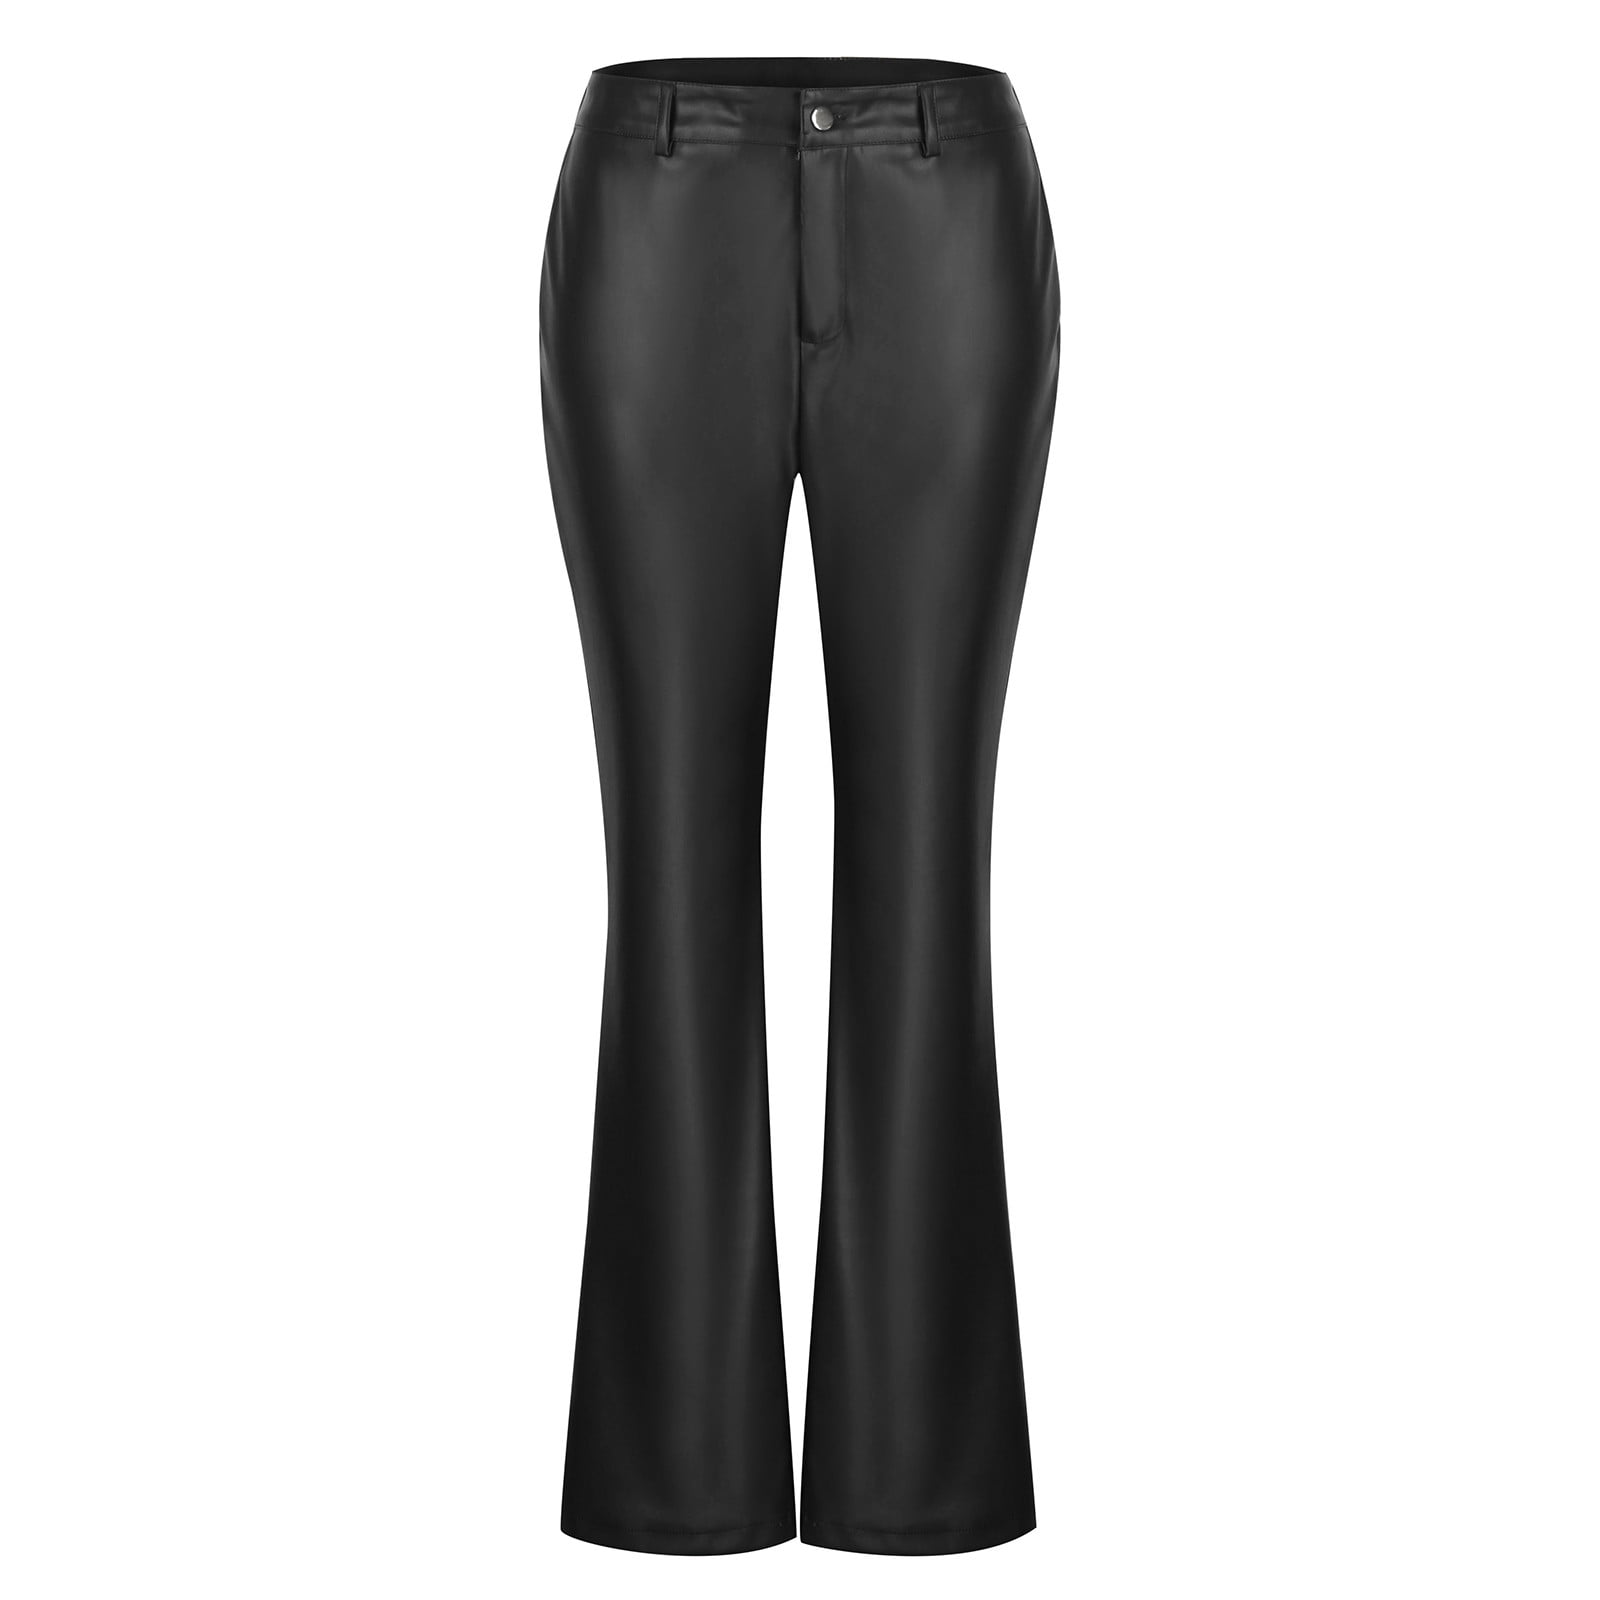 Coloquin Faux Leather Pants for Women High Waist Flare Leather Pants with  Pockets at  Women's Clothing store